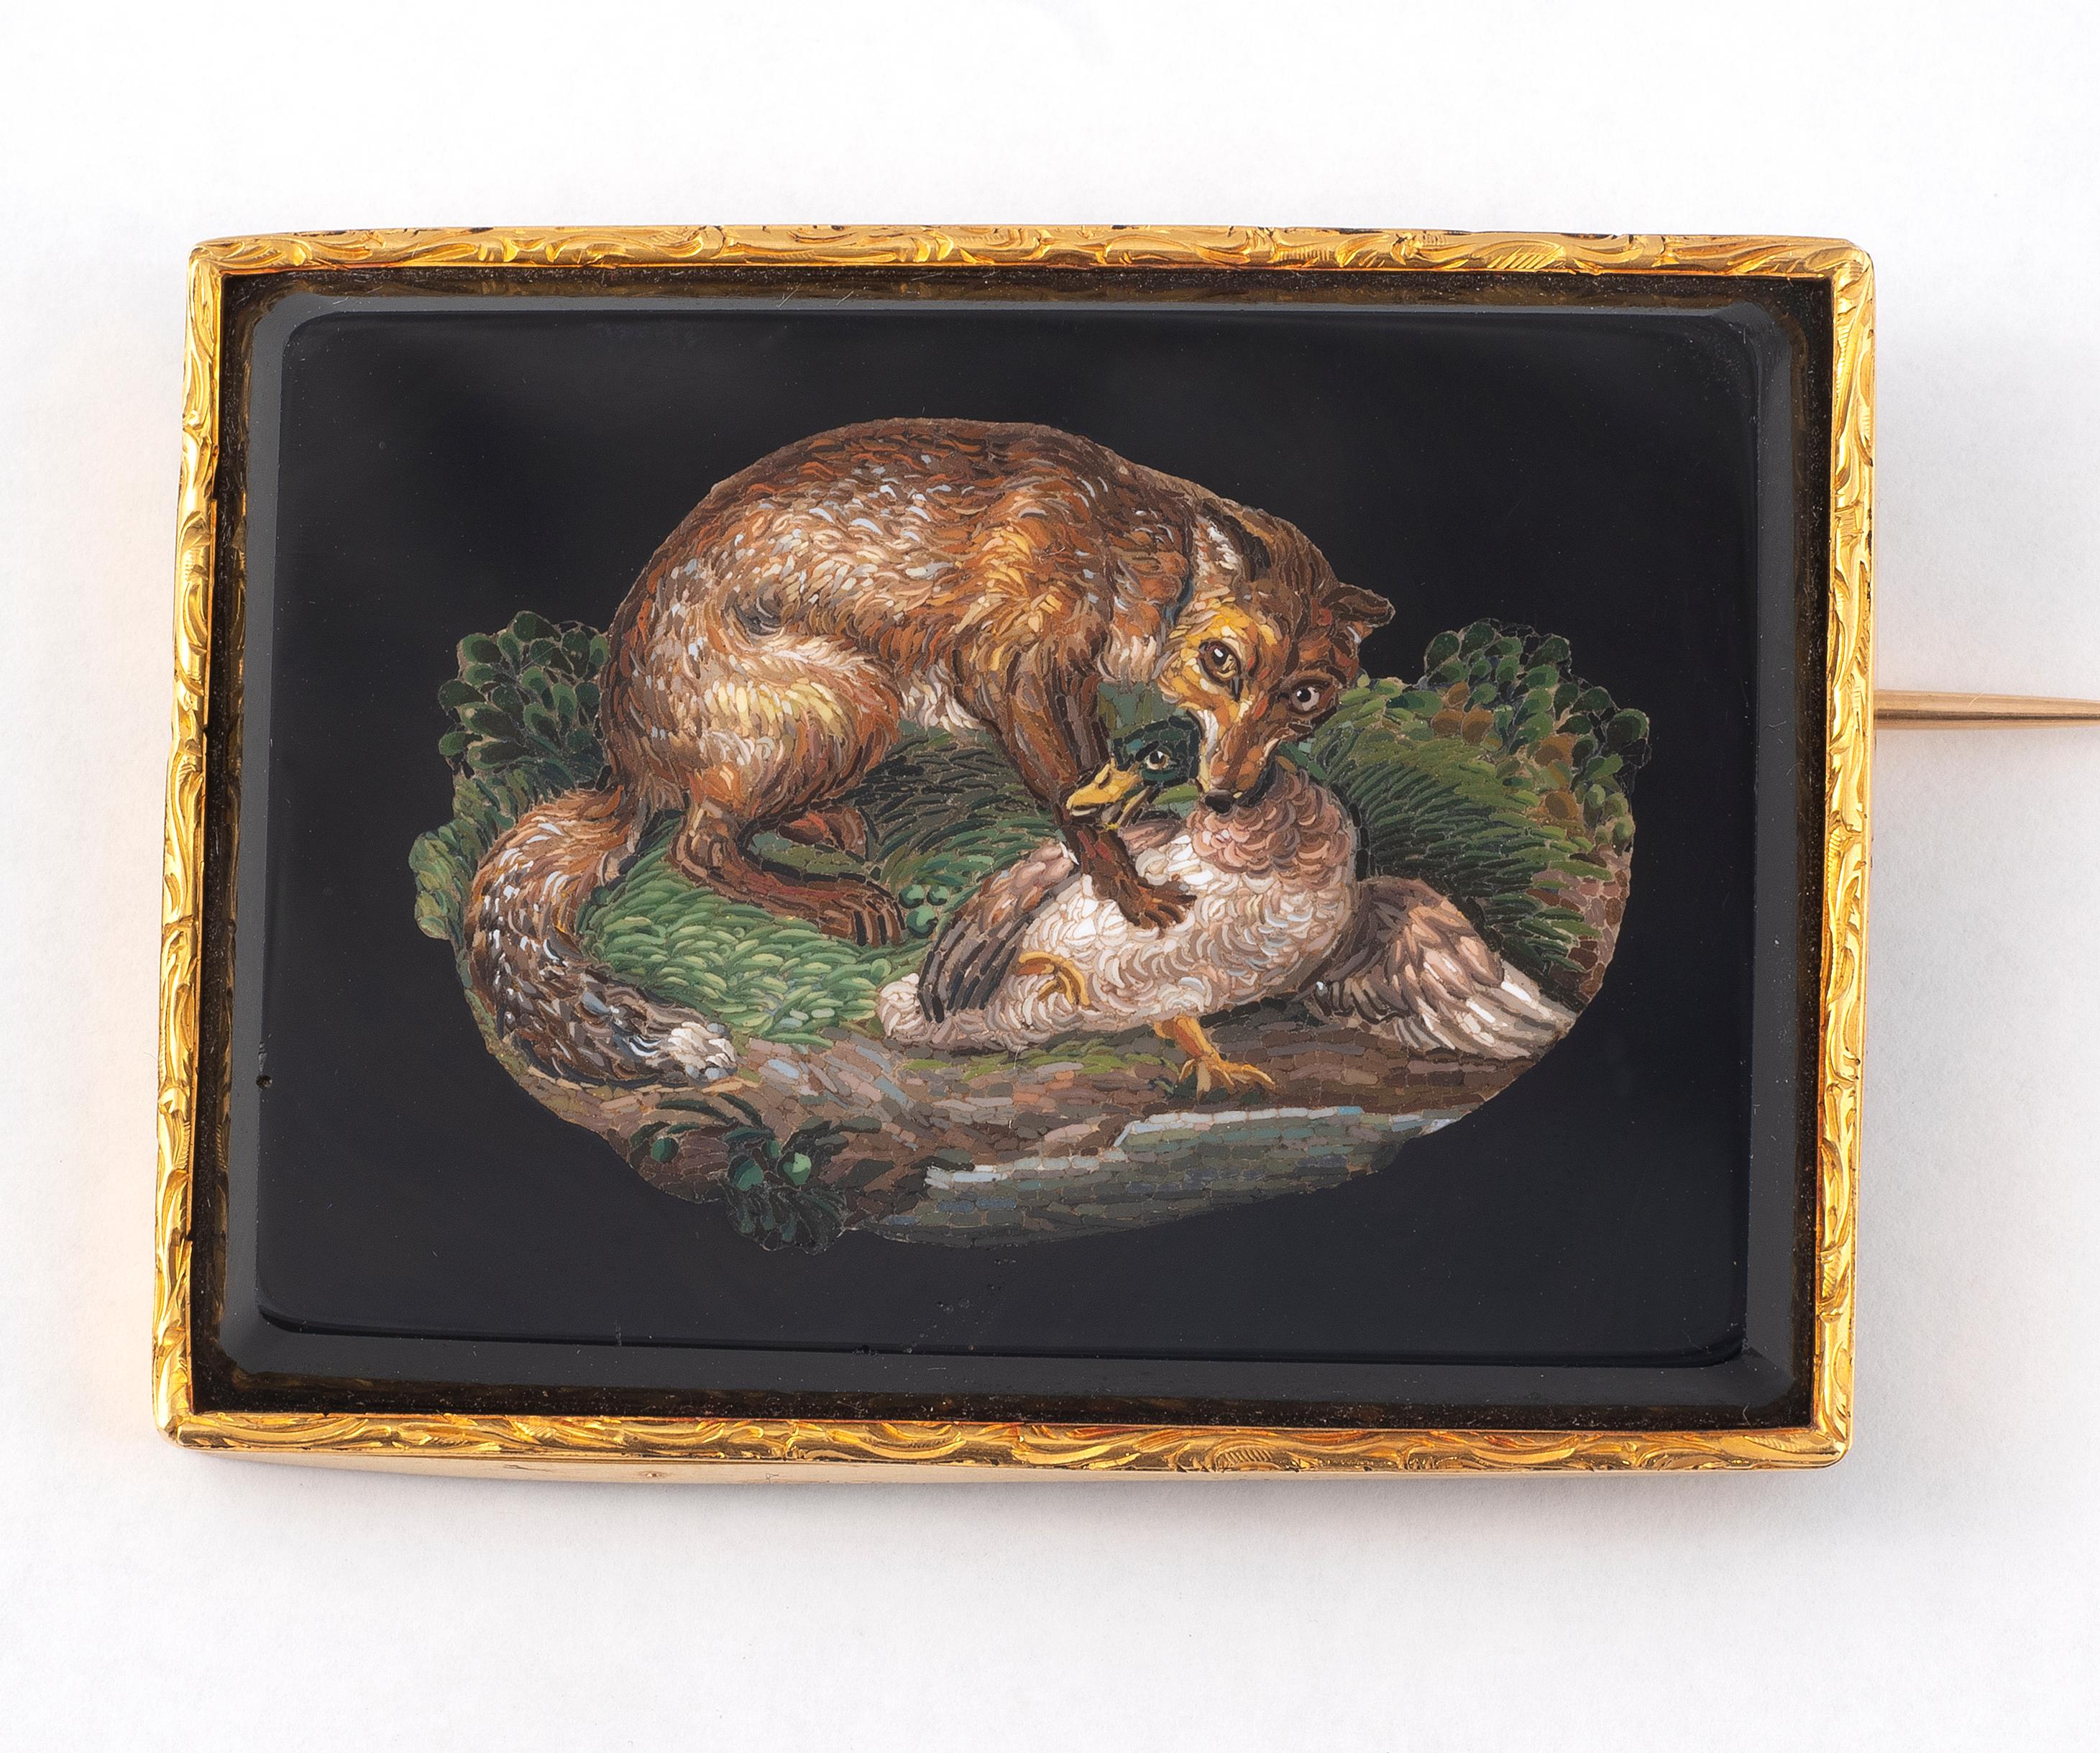 Rectangular brooch in chased yellow gold with a micro-mosaic representing a fox having caught a duck on a black background, Roman work of the 19th century, gross weight 30 g, in its case Dimensions : 4 x 5,2 cm.